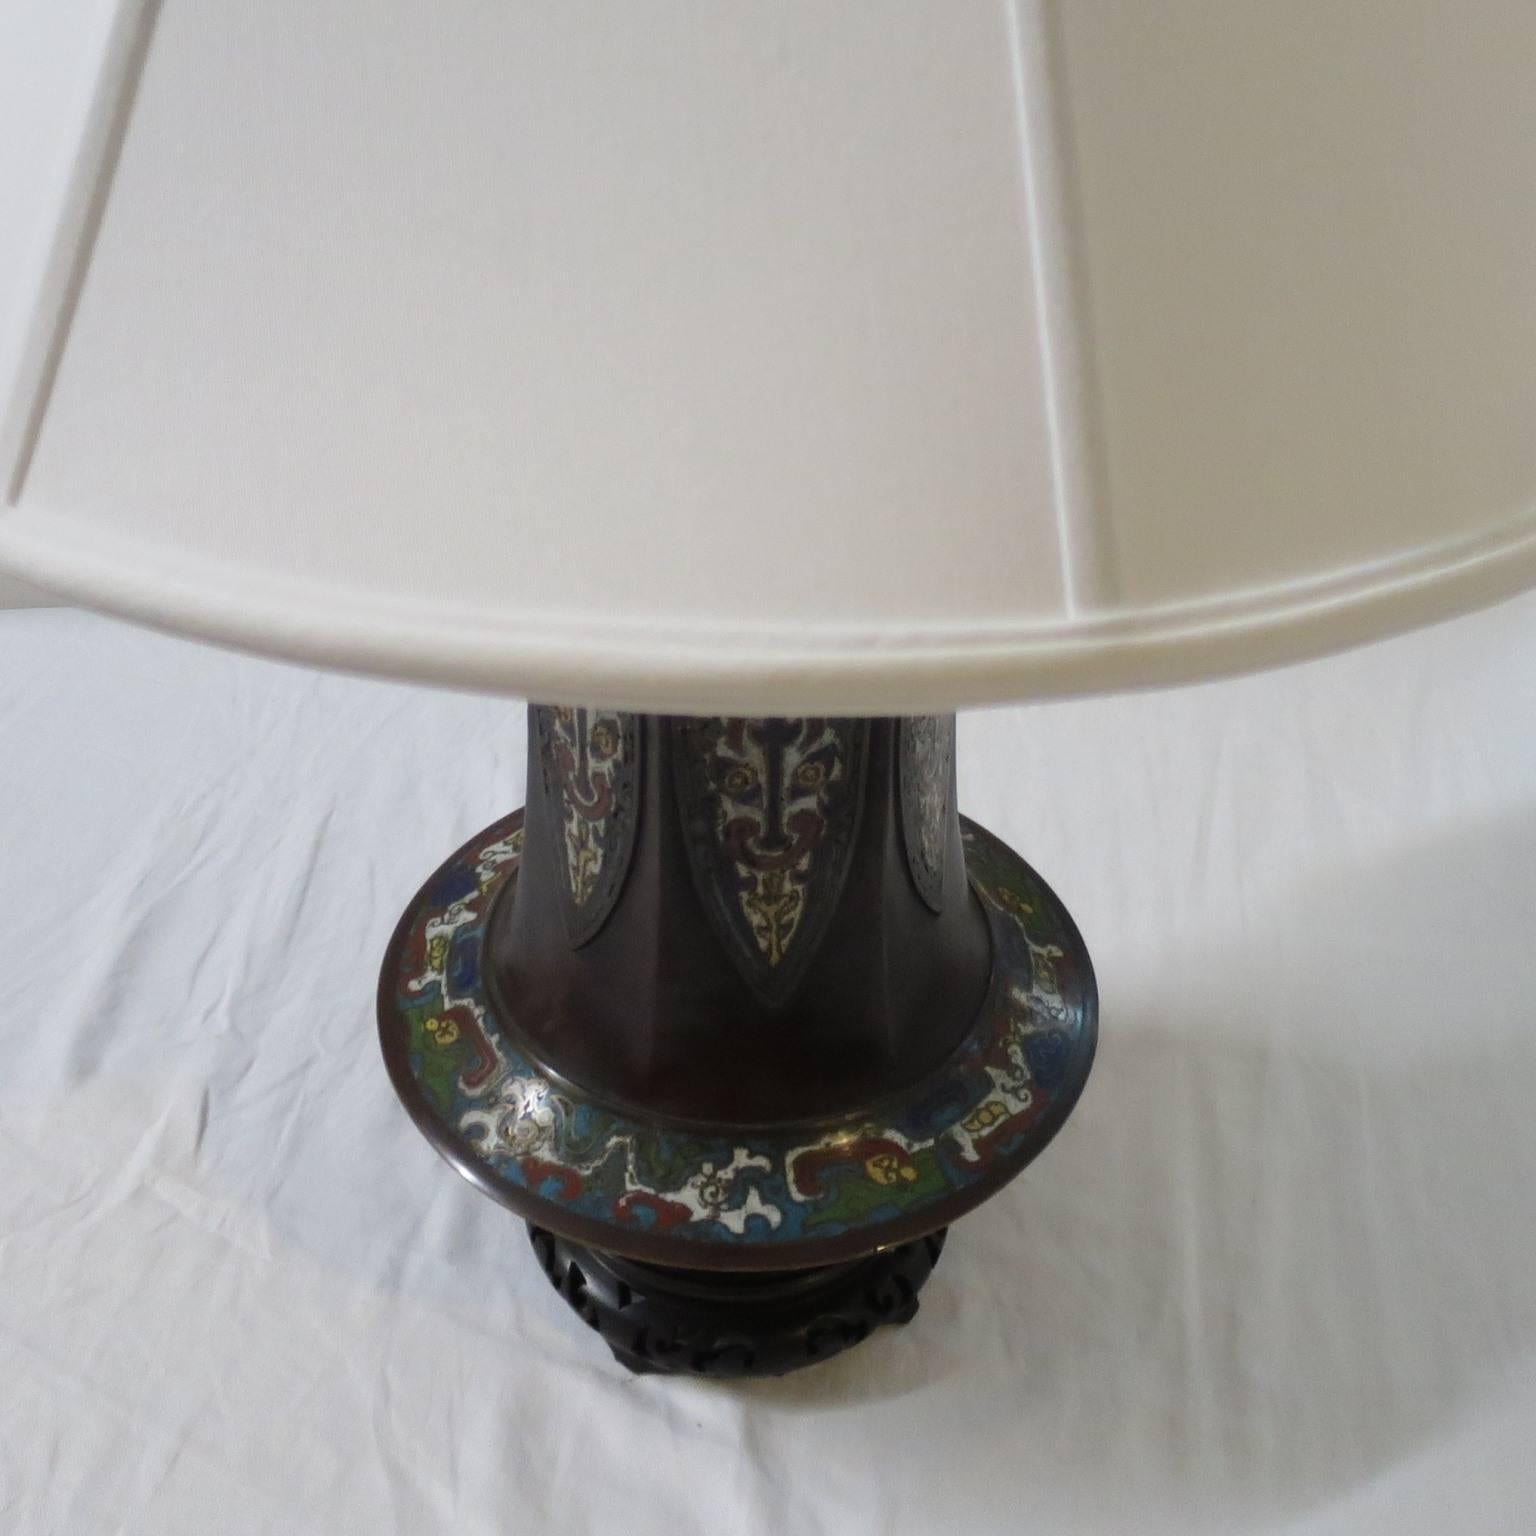 Chinese Cloisonné Enamel Bronze Vase 19th Century Mounted as a Table Lamp For Sale 3